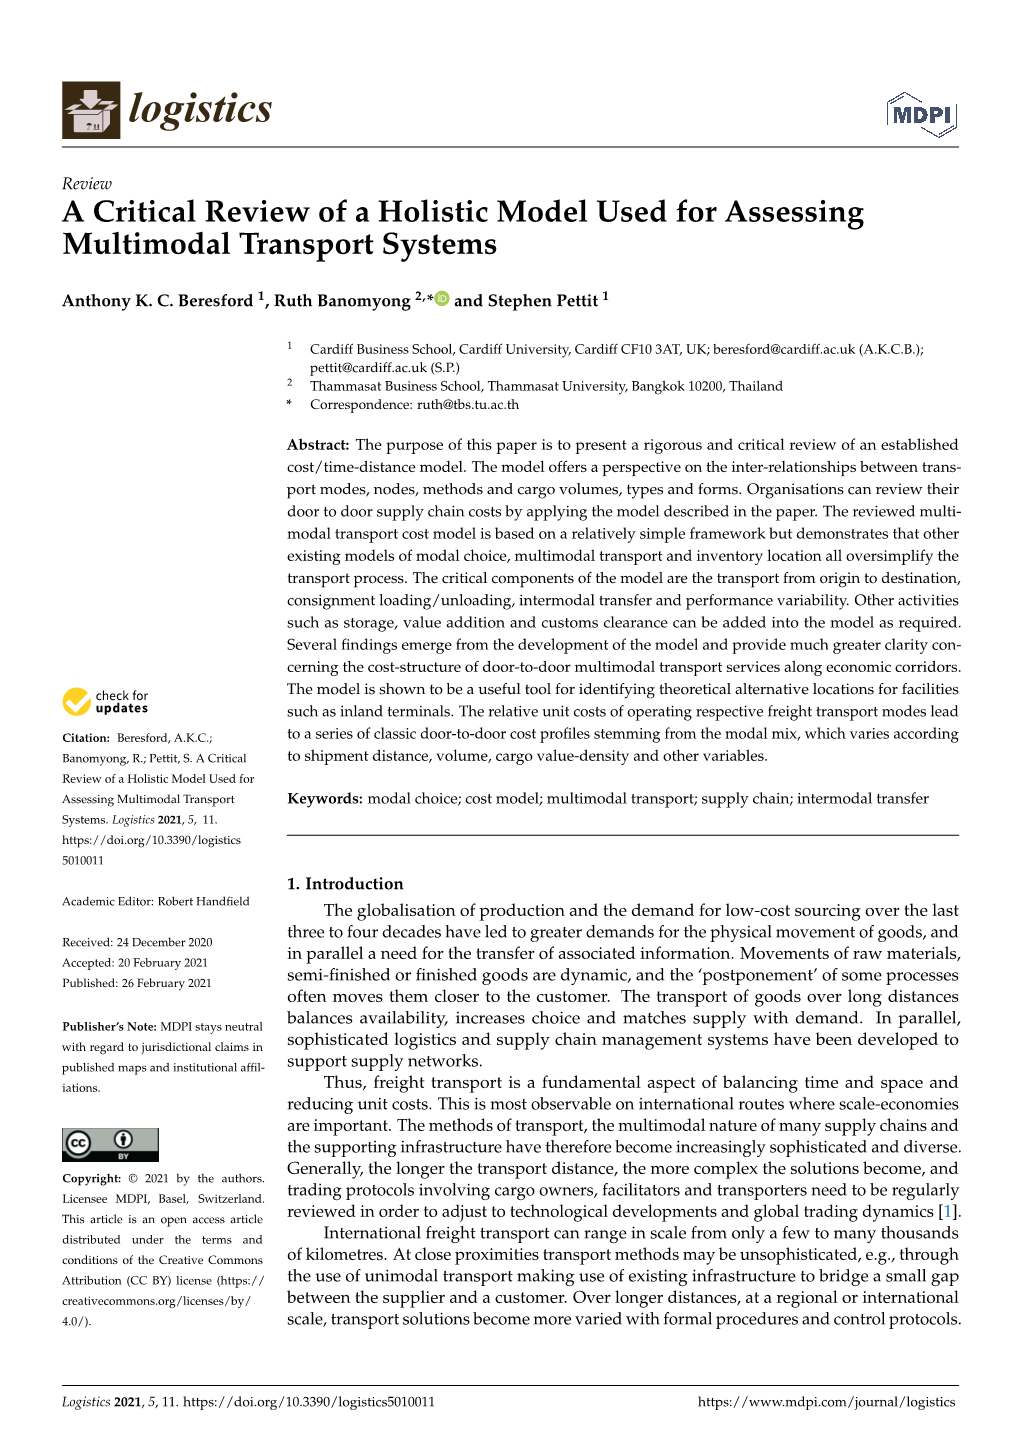 A Critical Review of a Holistic Model Used for Assessing Multimodal Transport Systems